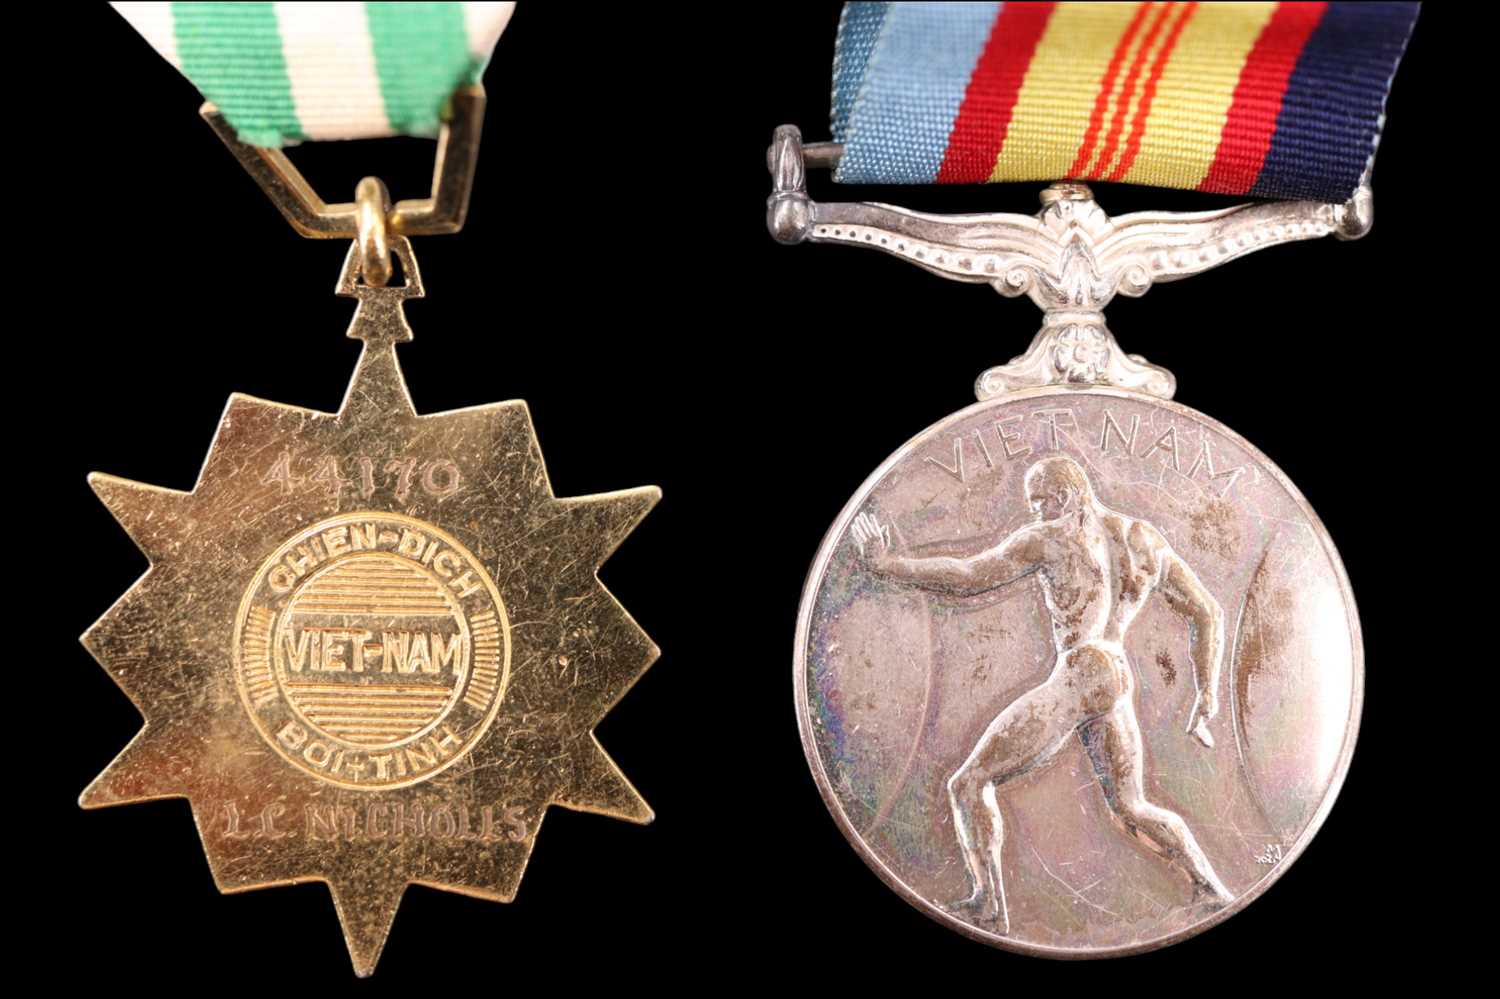 Vietnam War and South Vietnamese Campaign Medals to 44170 L C Nicholls - Image 2 of 2